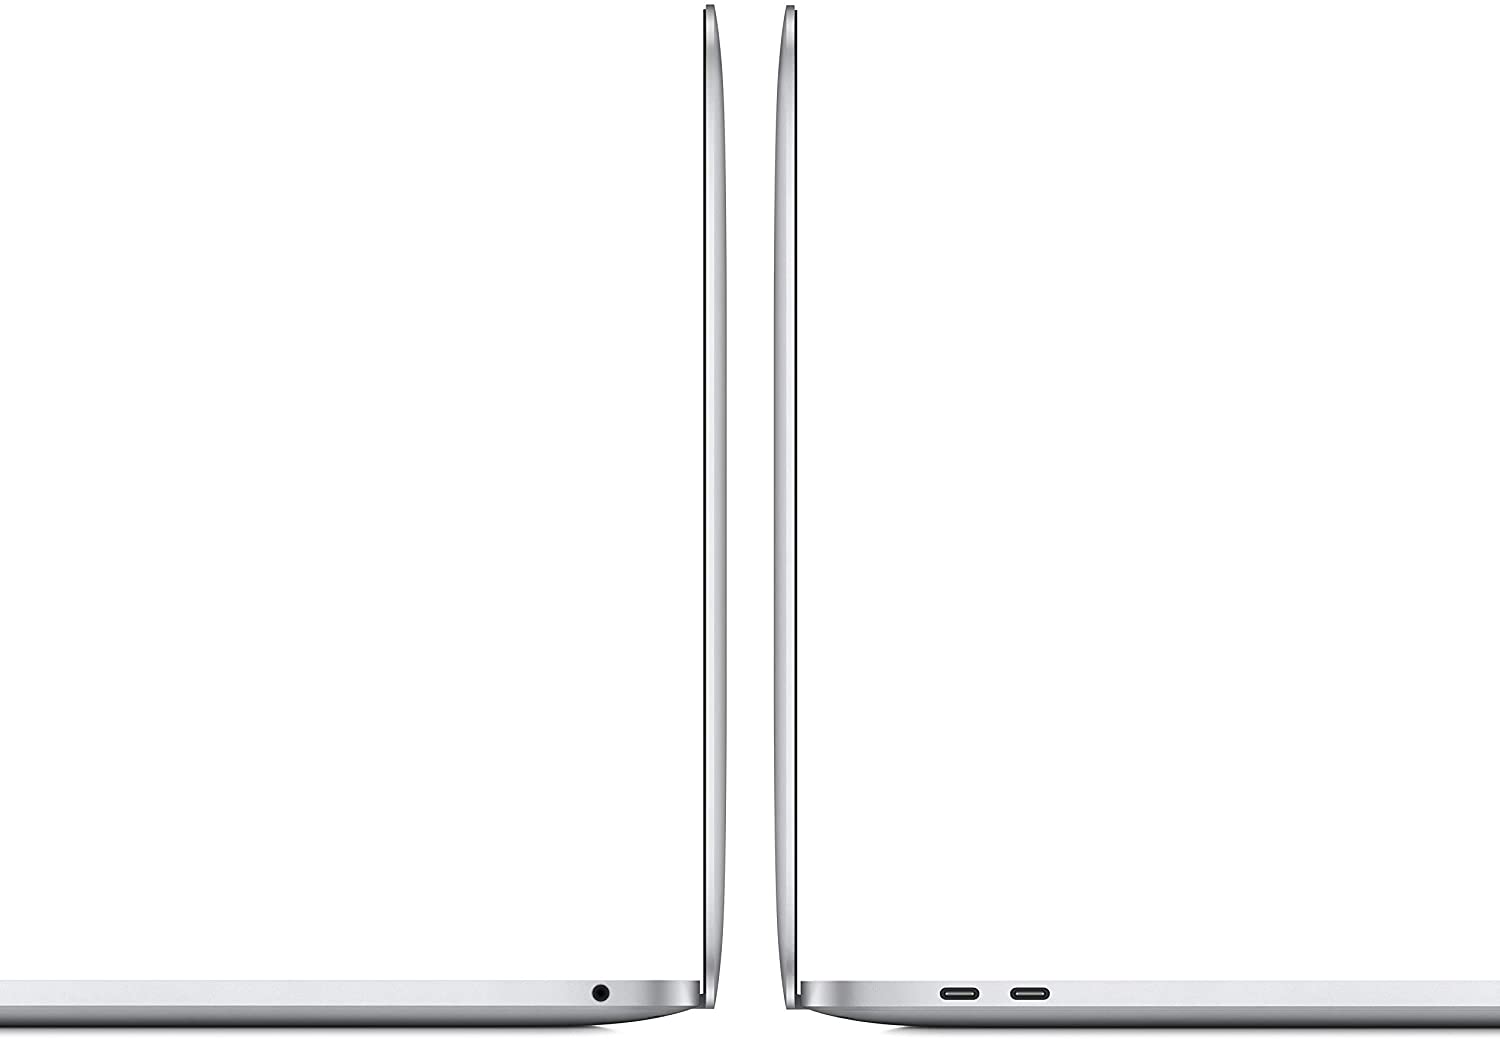 MacBook Pro 13-inch with Touch Bar and Touch ID (2020) – Core i5 1.4GHz 8GB 512GB - Silver